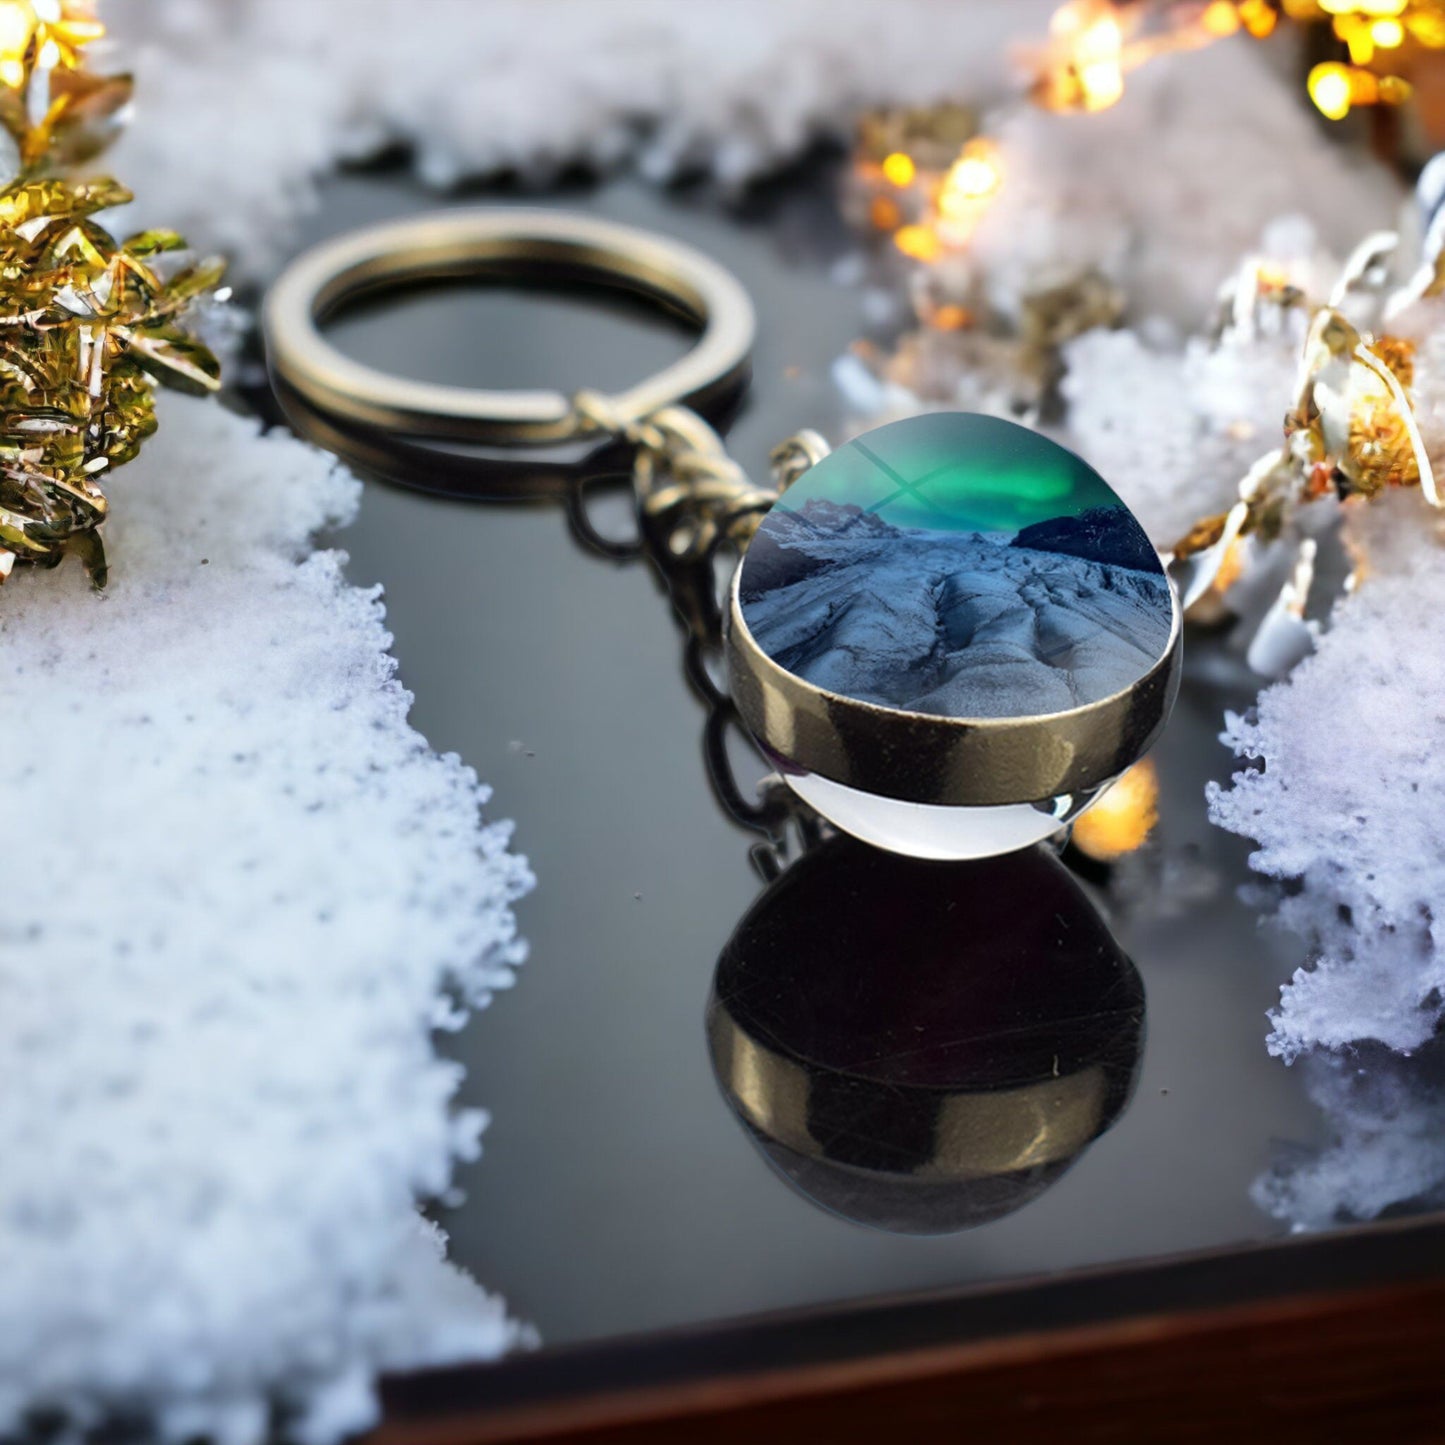 Unique Aurora Borealis Keyring - Northern Light Jewelry - Double Side Glass Ball Key Chain - Perfect Aurora Lovers Gift 21